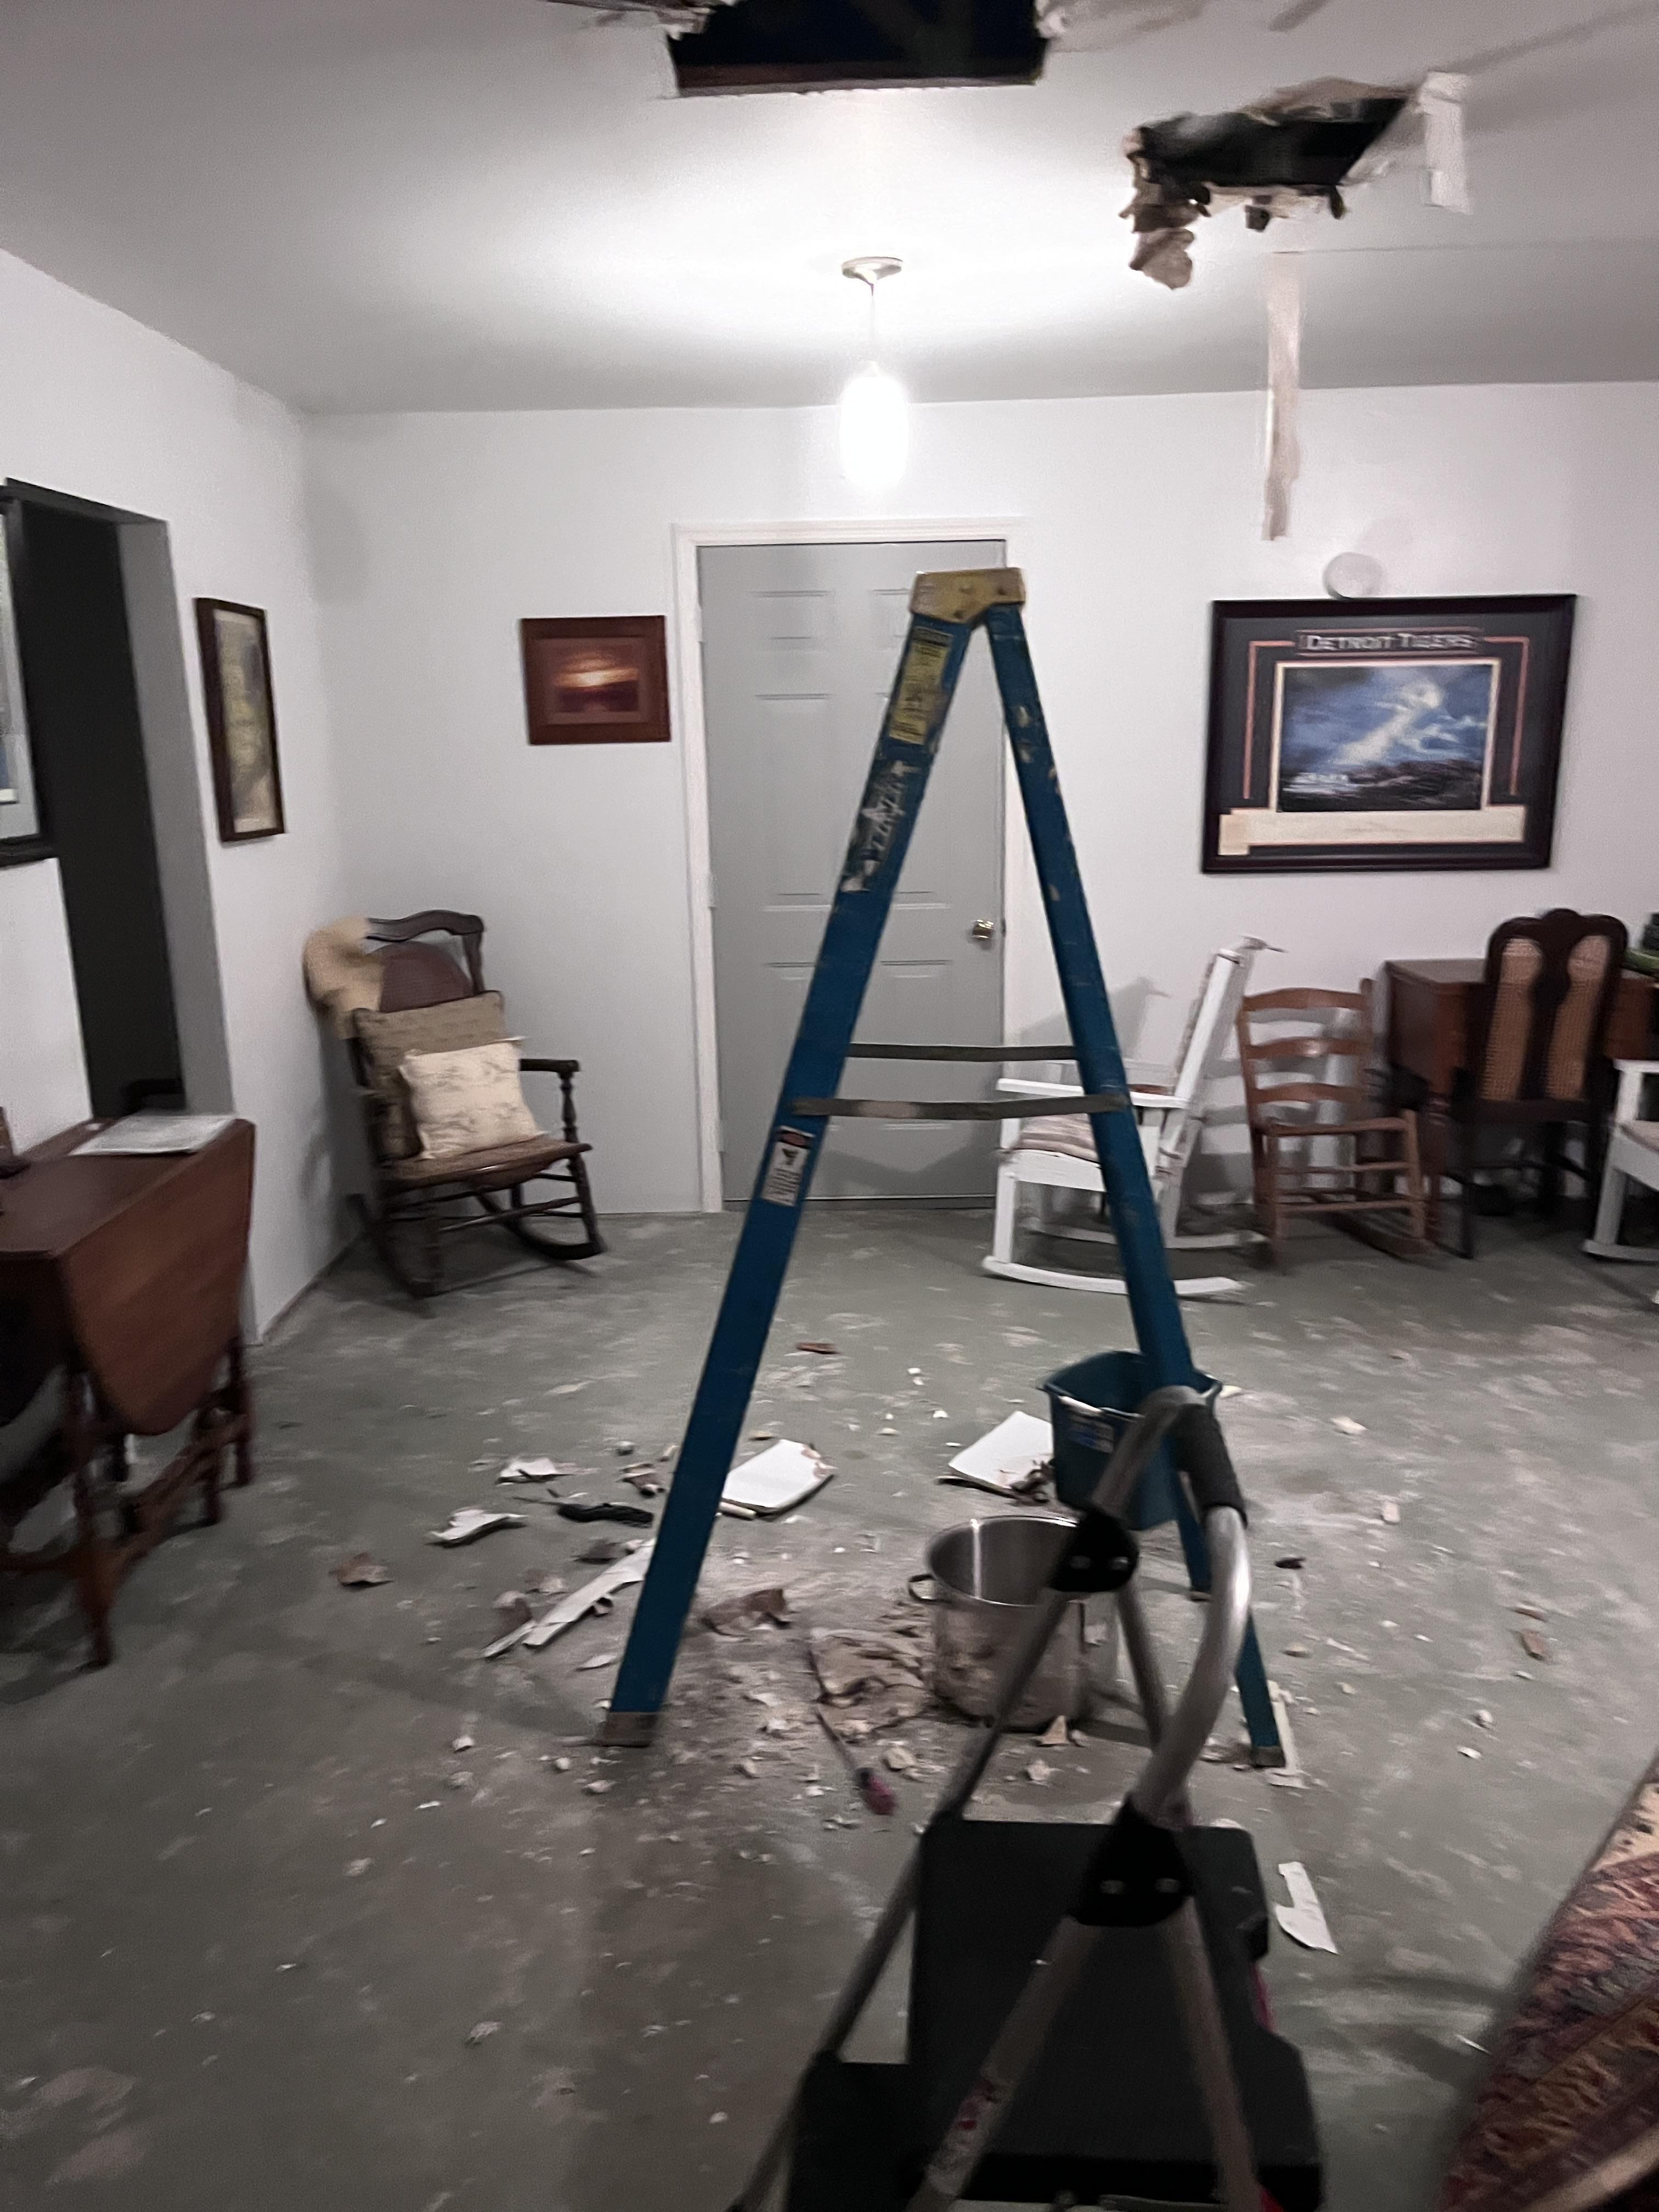 Ceiling fell in basement due to water damage